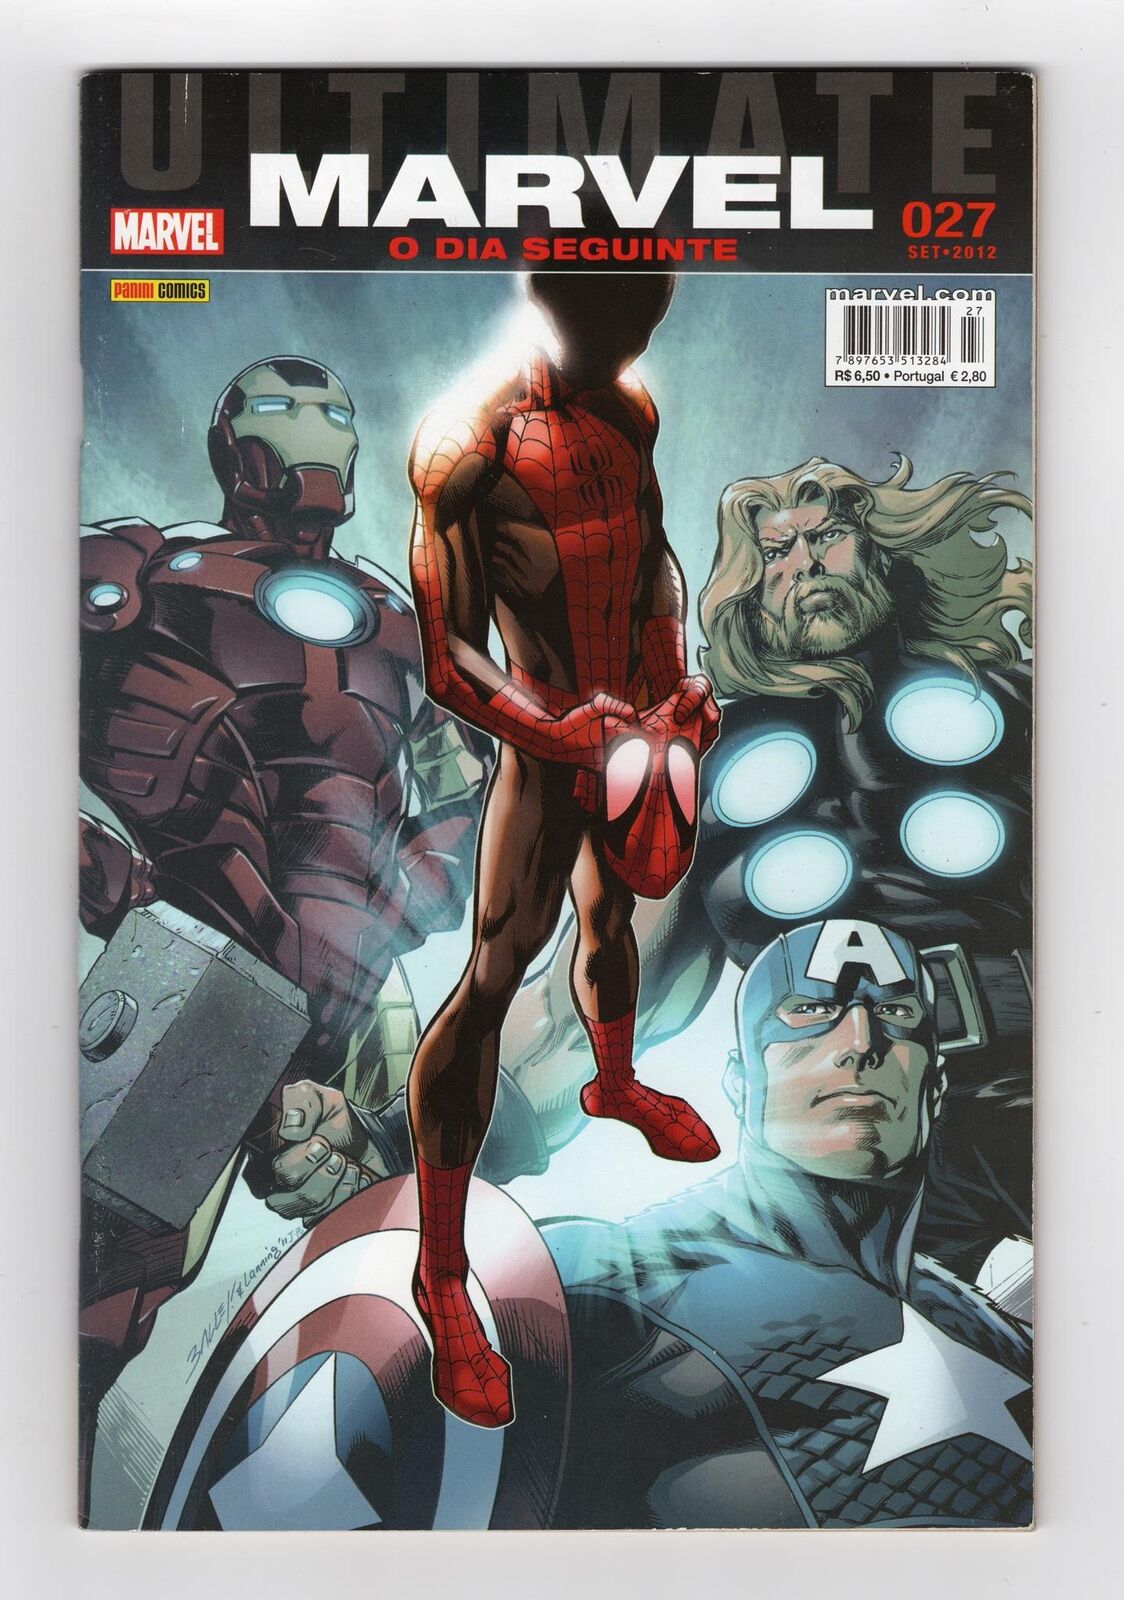 2011 MARVEL ULTIMATE FALLOUT #4 1ST APPEARANCE OF MILES MORALES KEY RARE BRAZIL